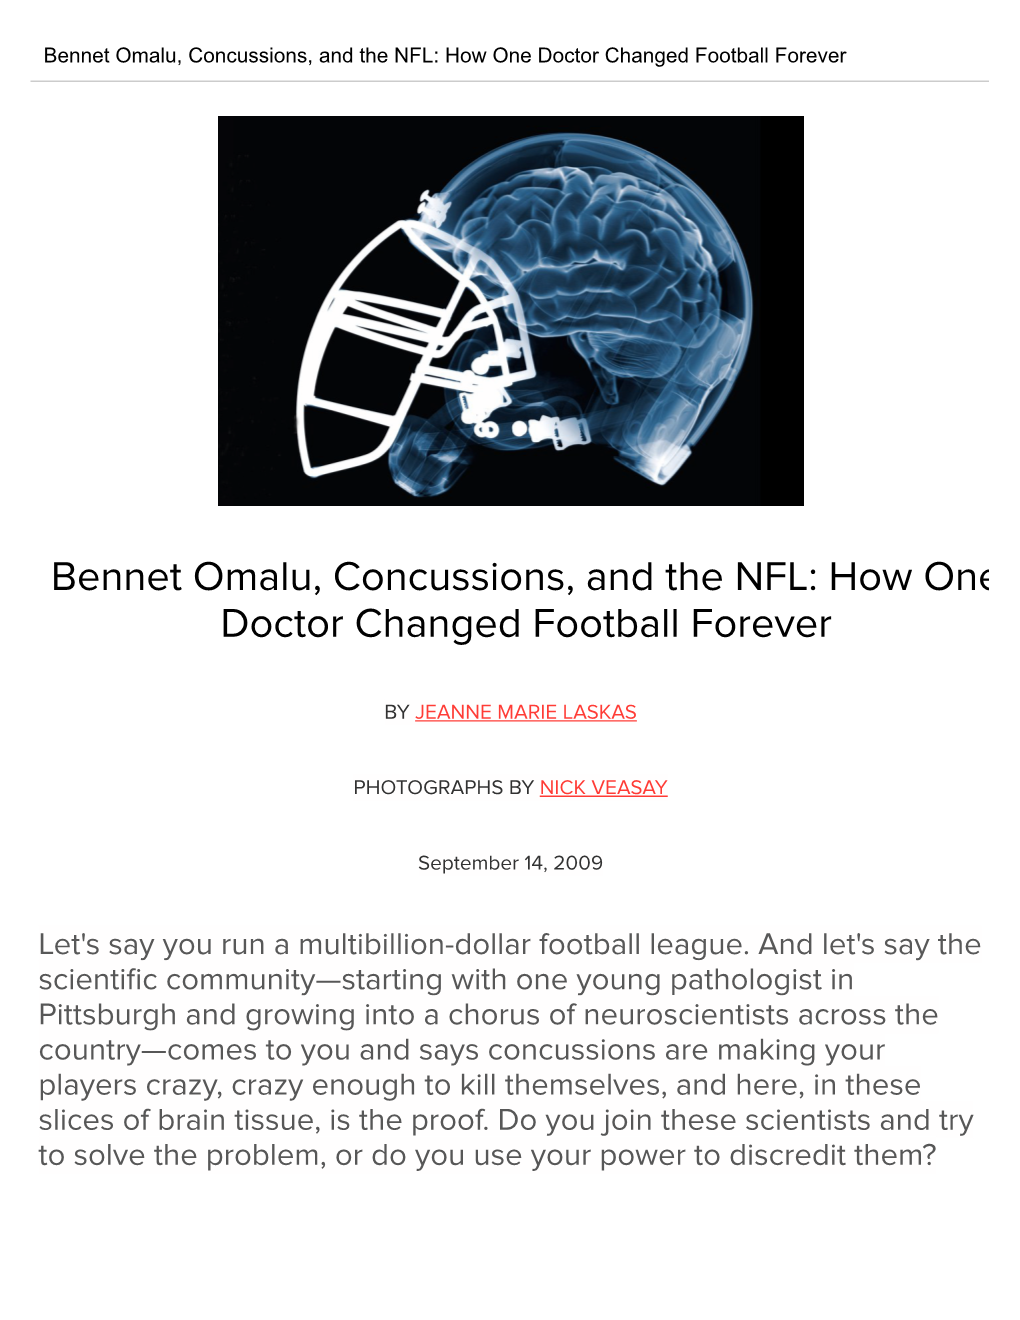 Bennet Omalu, Concussions, and the NFL: How One Doctor Changed Football Forever